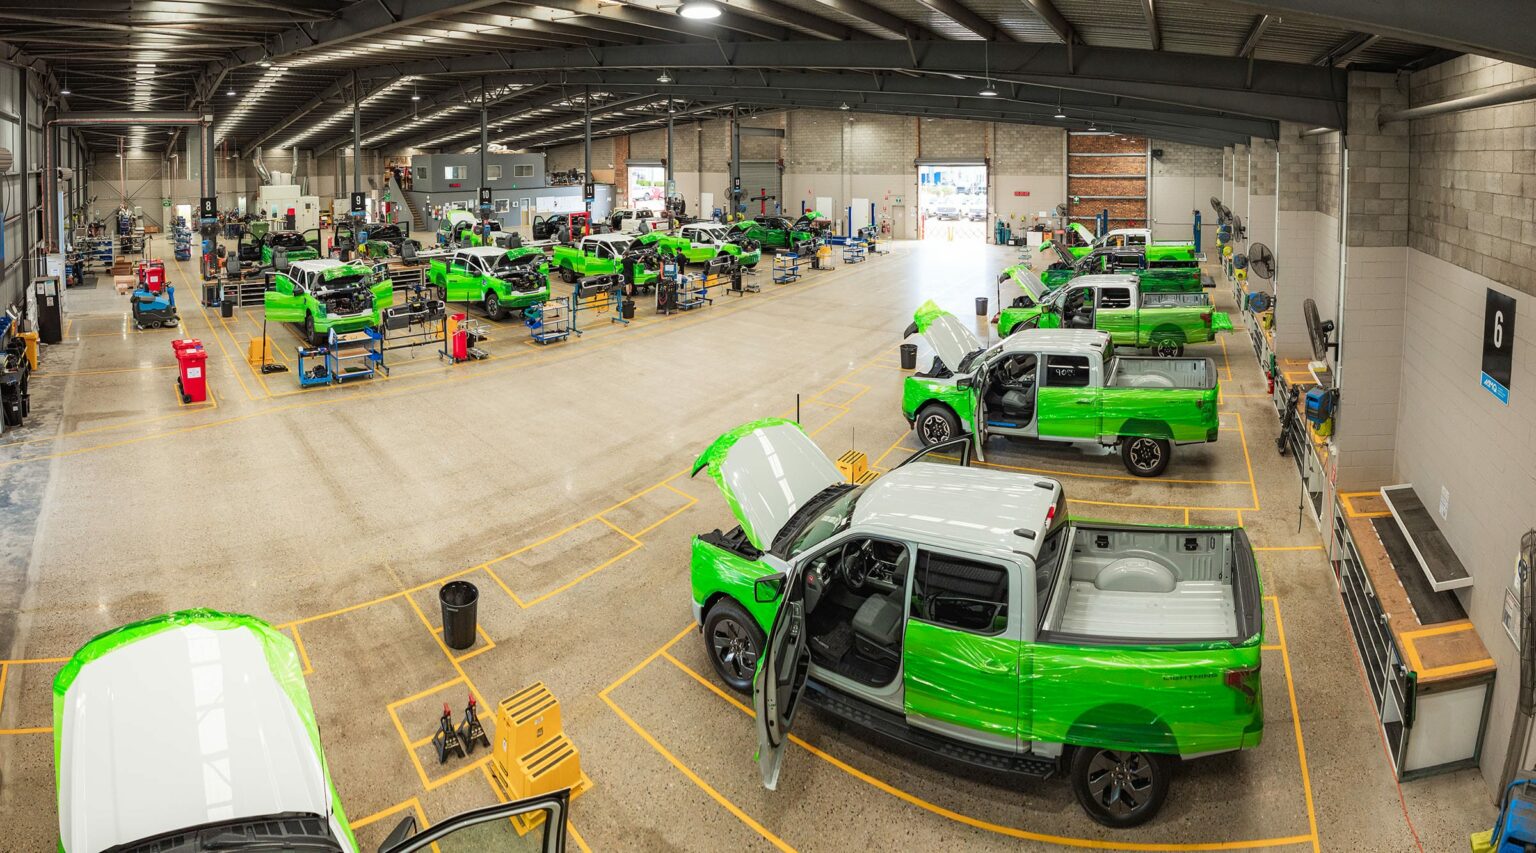 AUSEV - A panoramic view of a bright, busy car assembly line with workers actively engaging in the manufacturing process of vibrant green F-150 Lightning trucks.